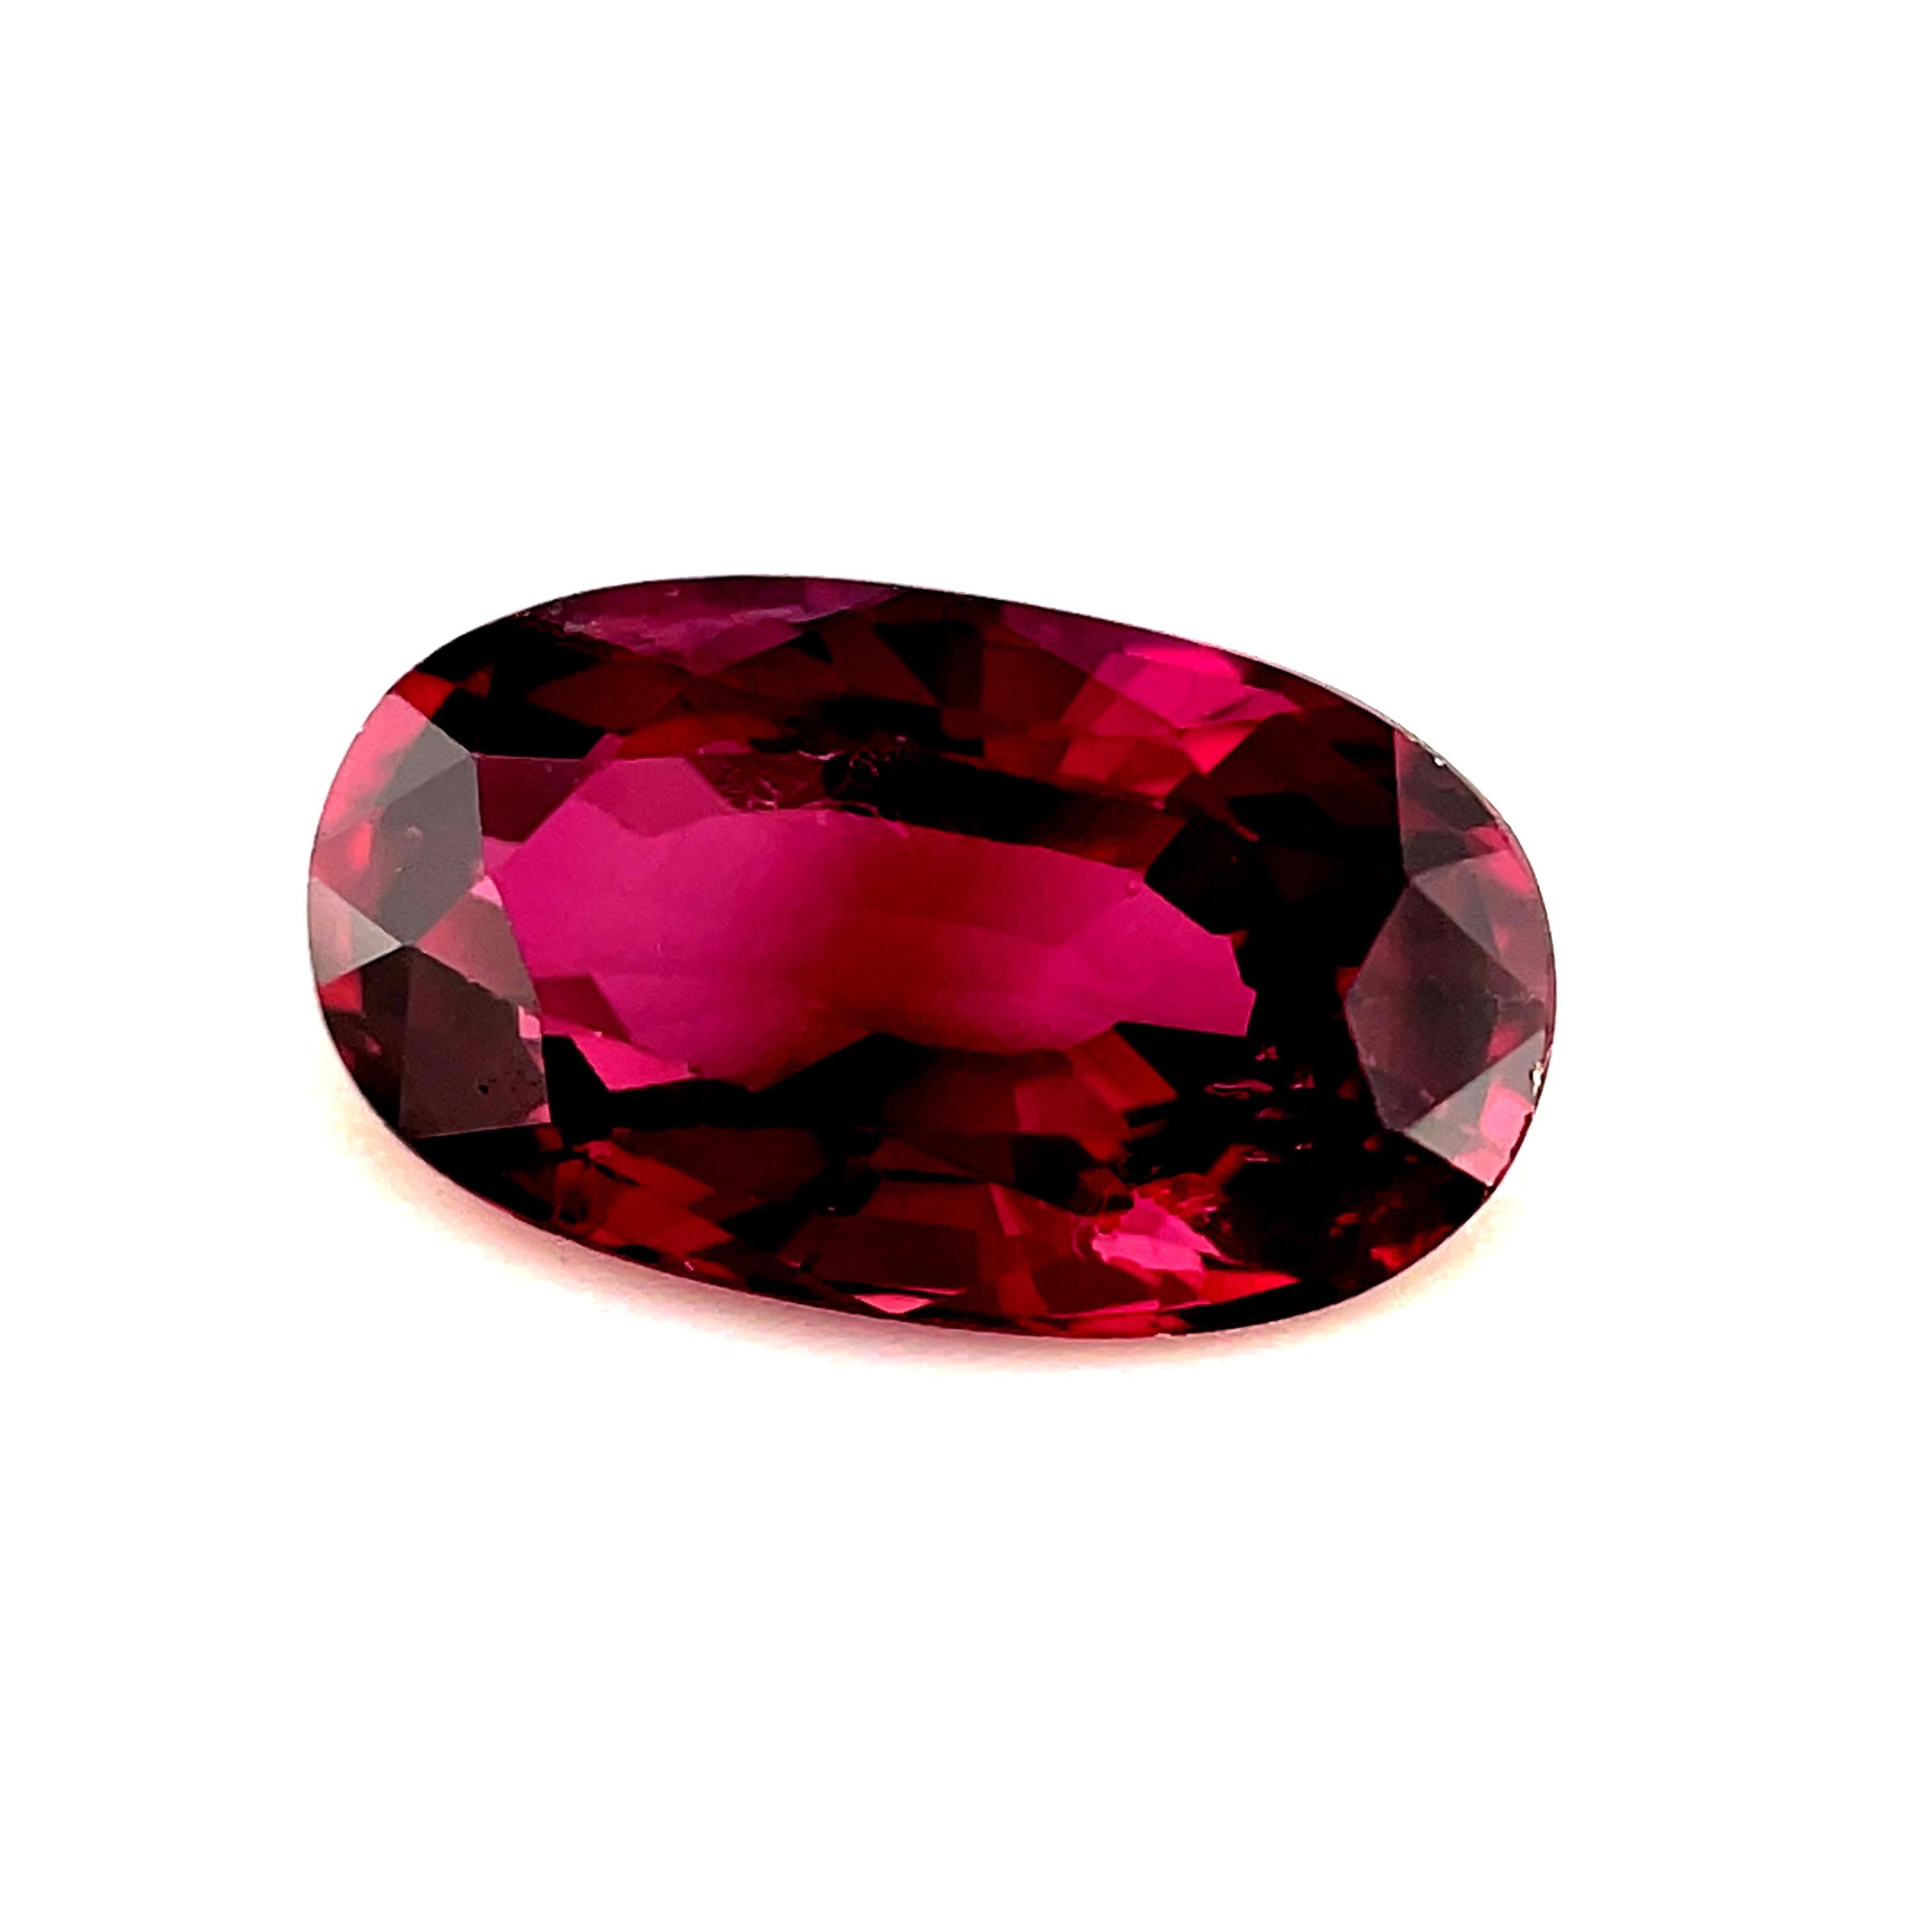 This beautiful 1.46 carat oval ruby has rich, cranberry red color and sparkling pink highlights! It is eye-clean and measures 8.76 x 5.03 millimeters with an elegant, slender outline that will make a beautiful piece of jewelry! The longer sides of